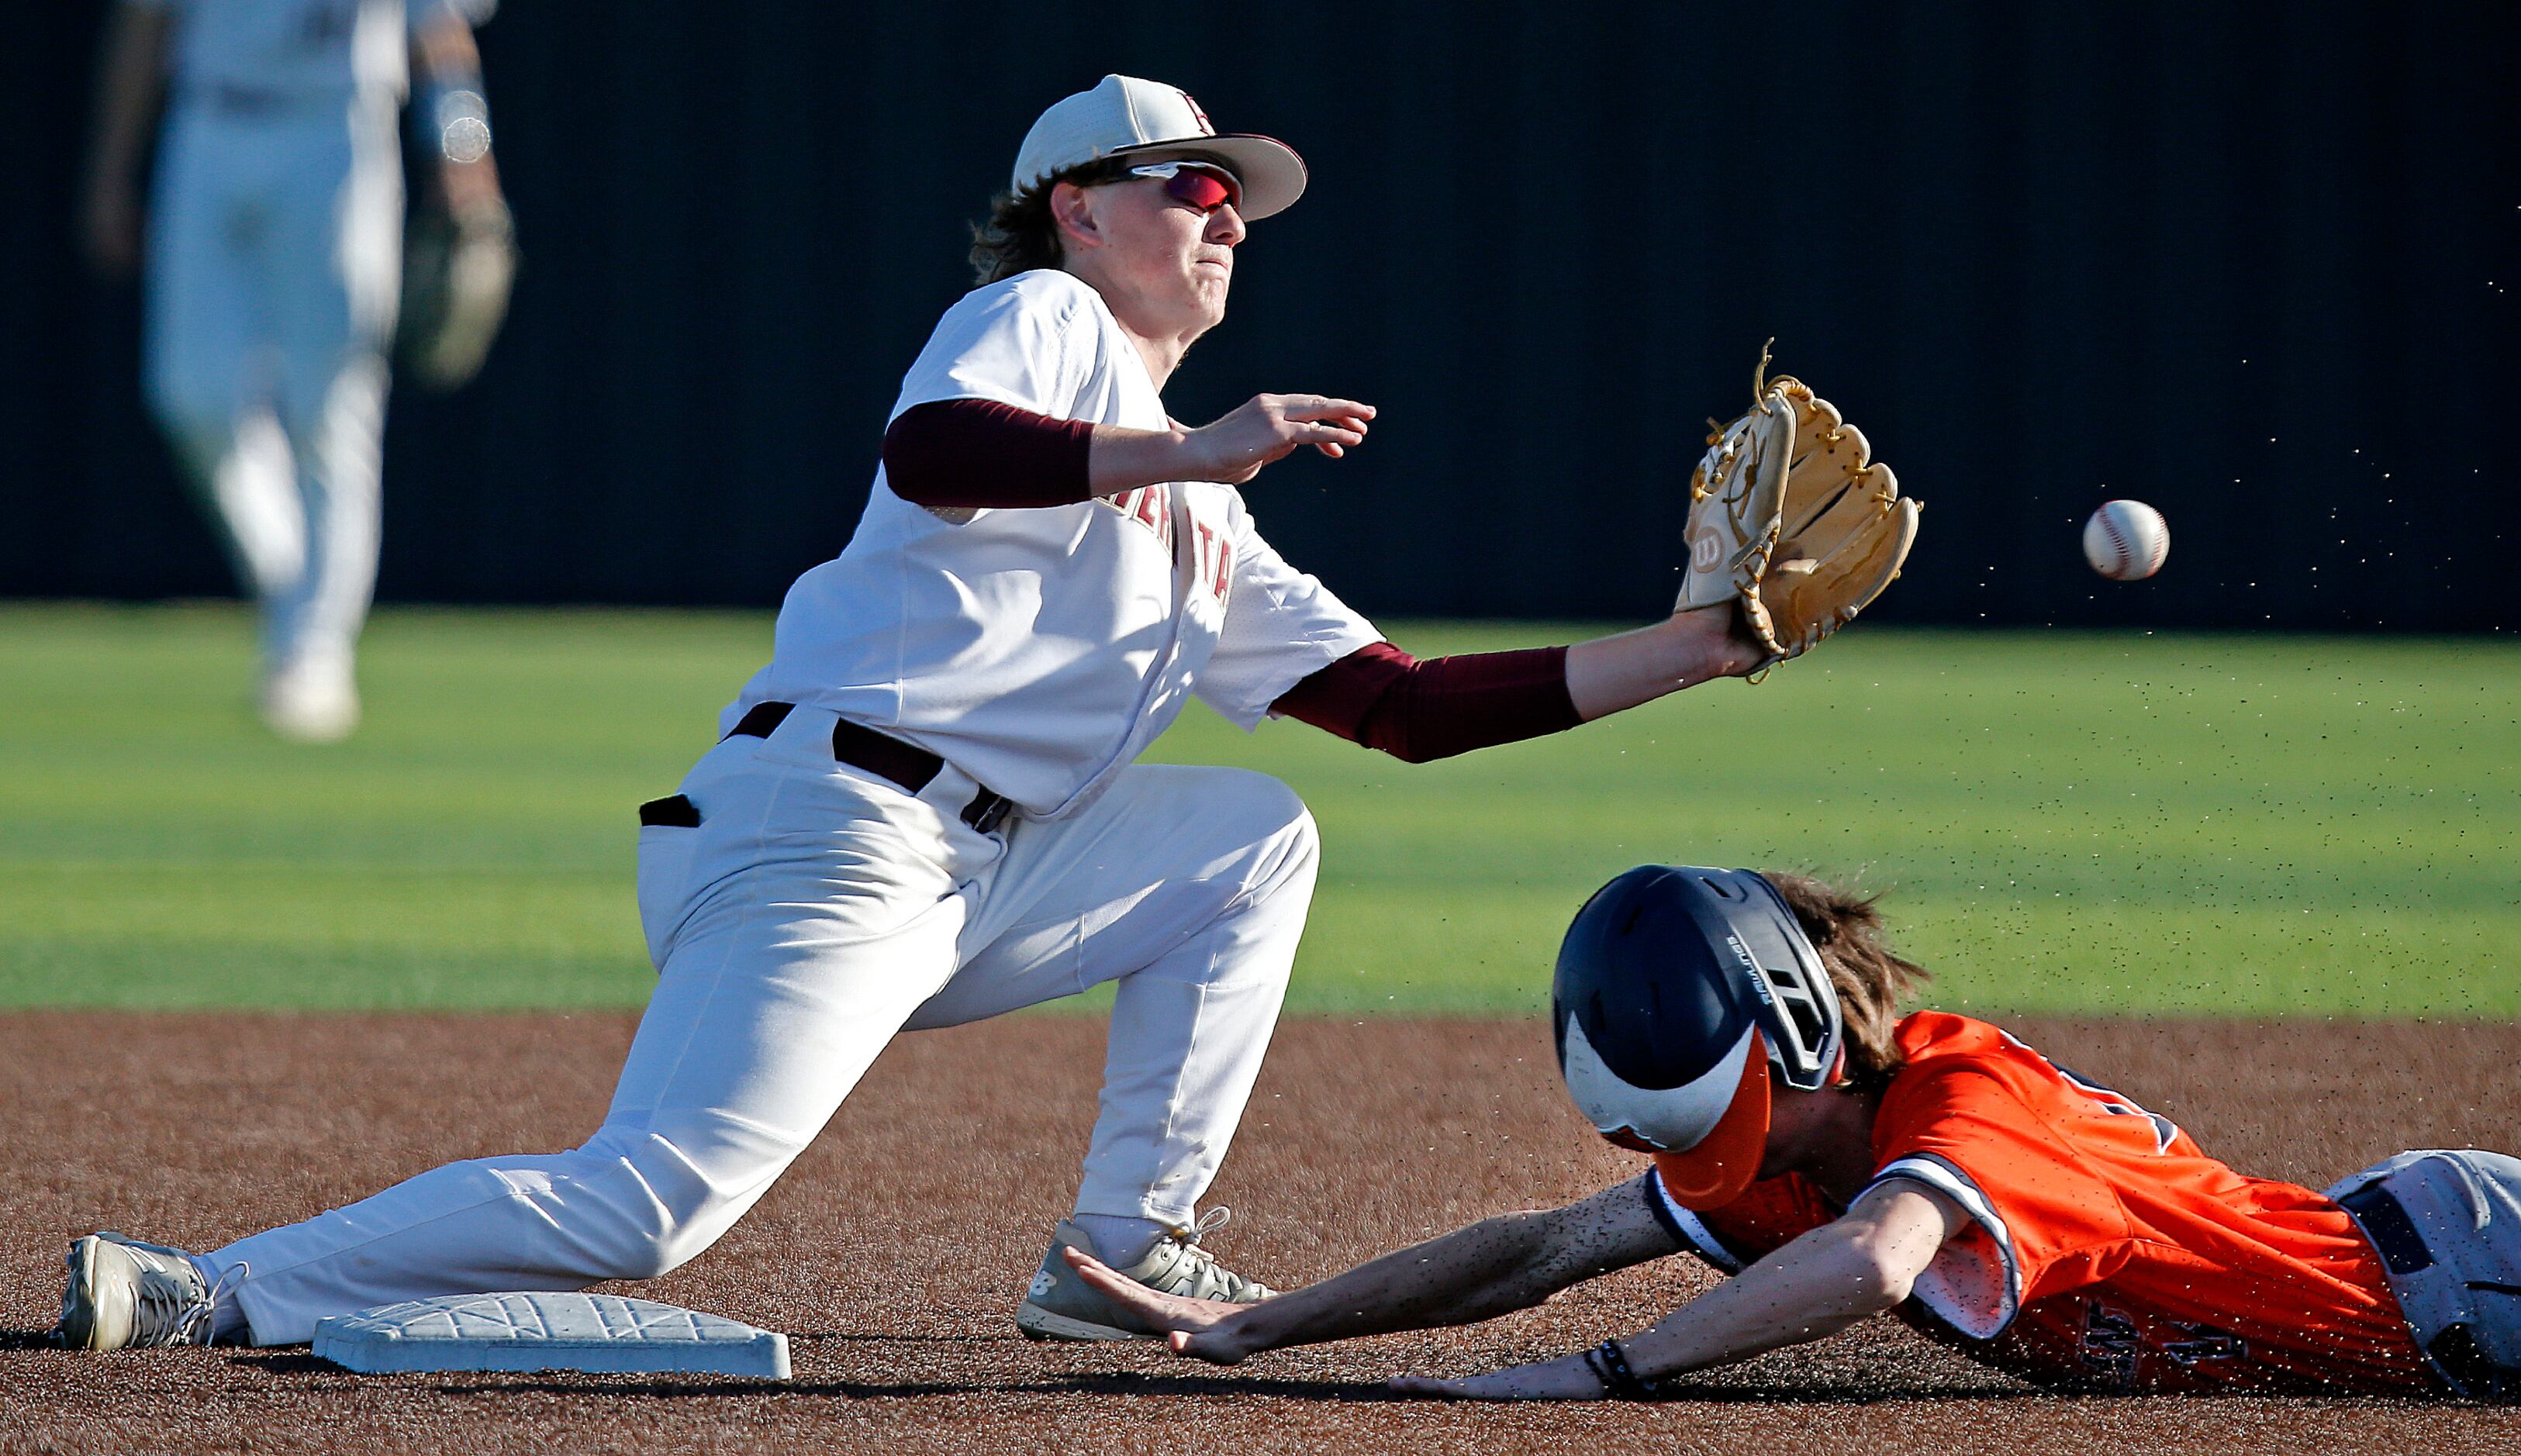 Heritage second baseman Gehrig Butz (14) wasn’t able to put the tag on Wakeland base runner...